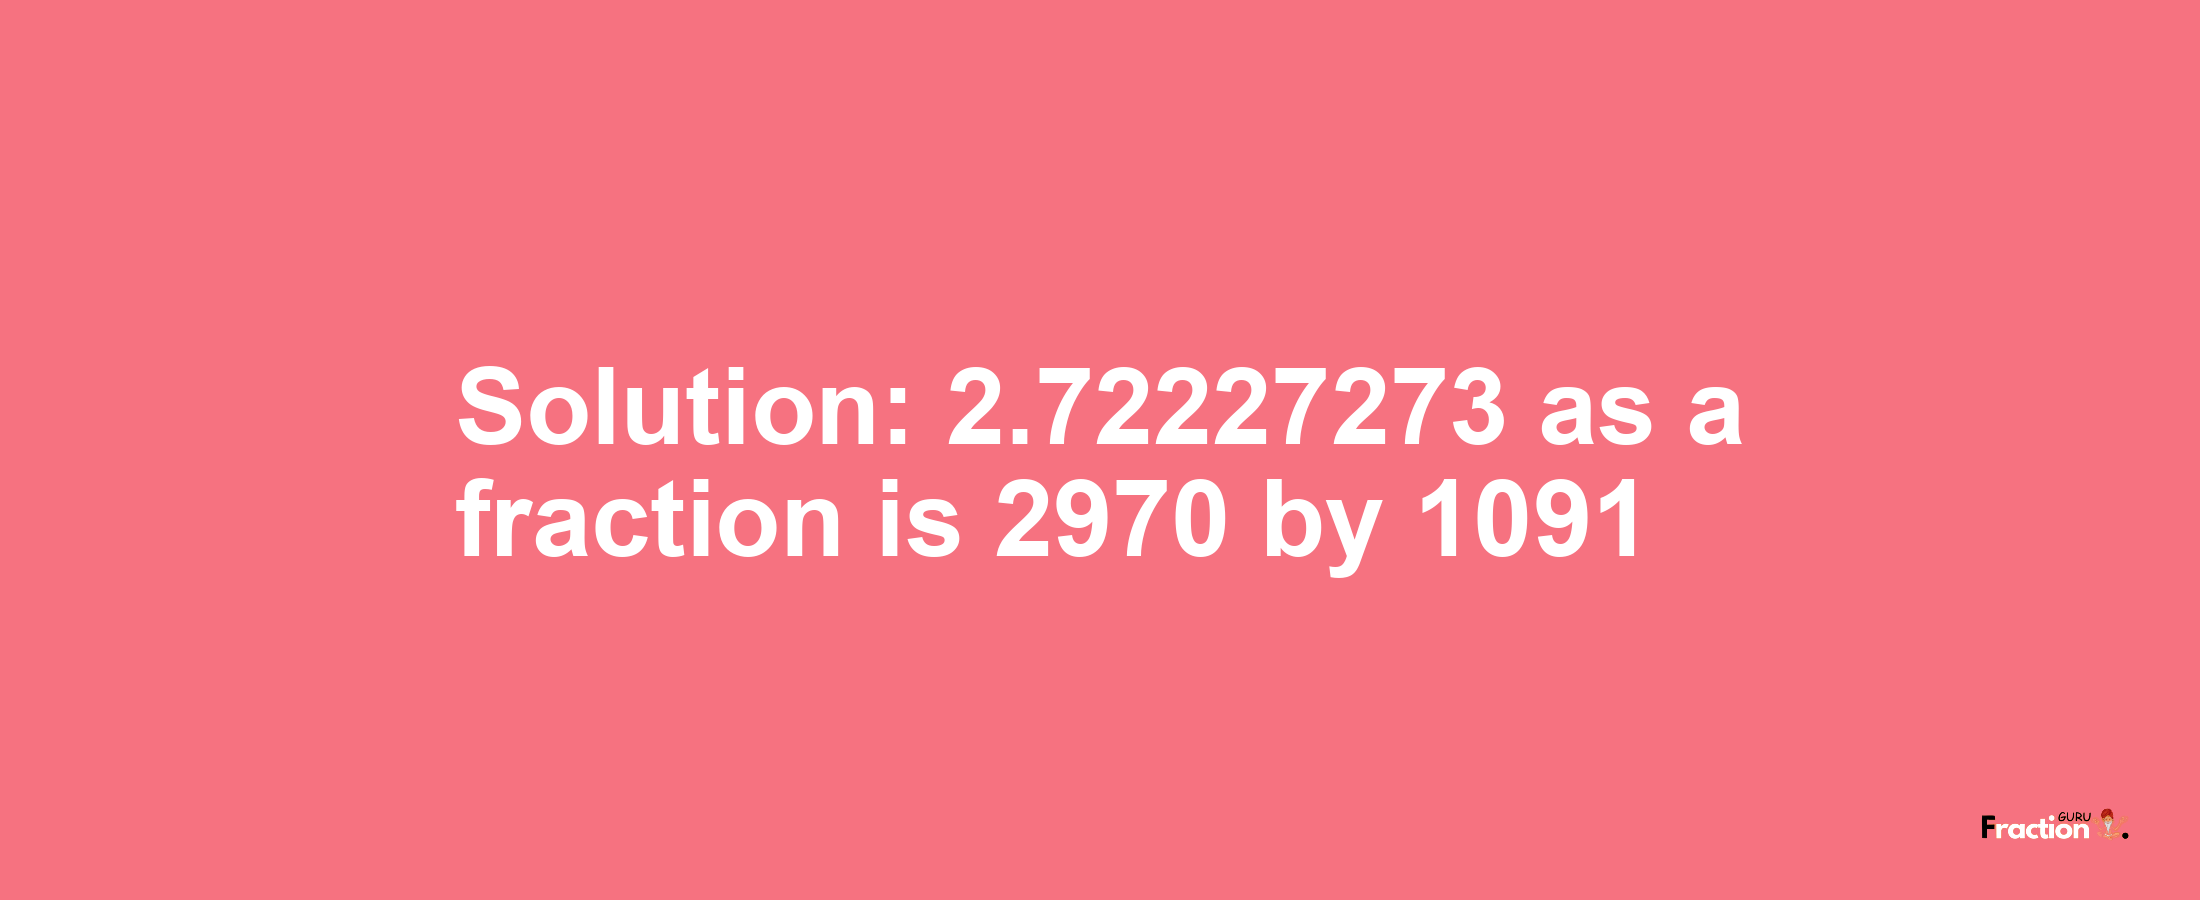 Solution:2.72227273 as a fraction is 2970/1091